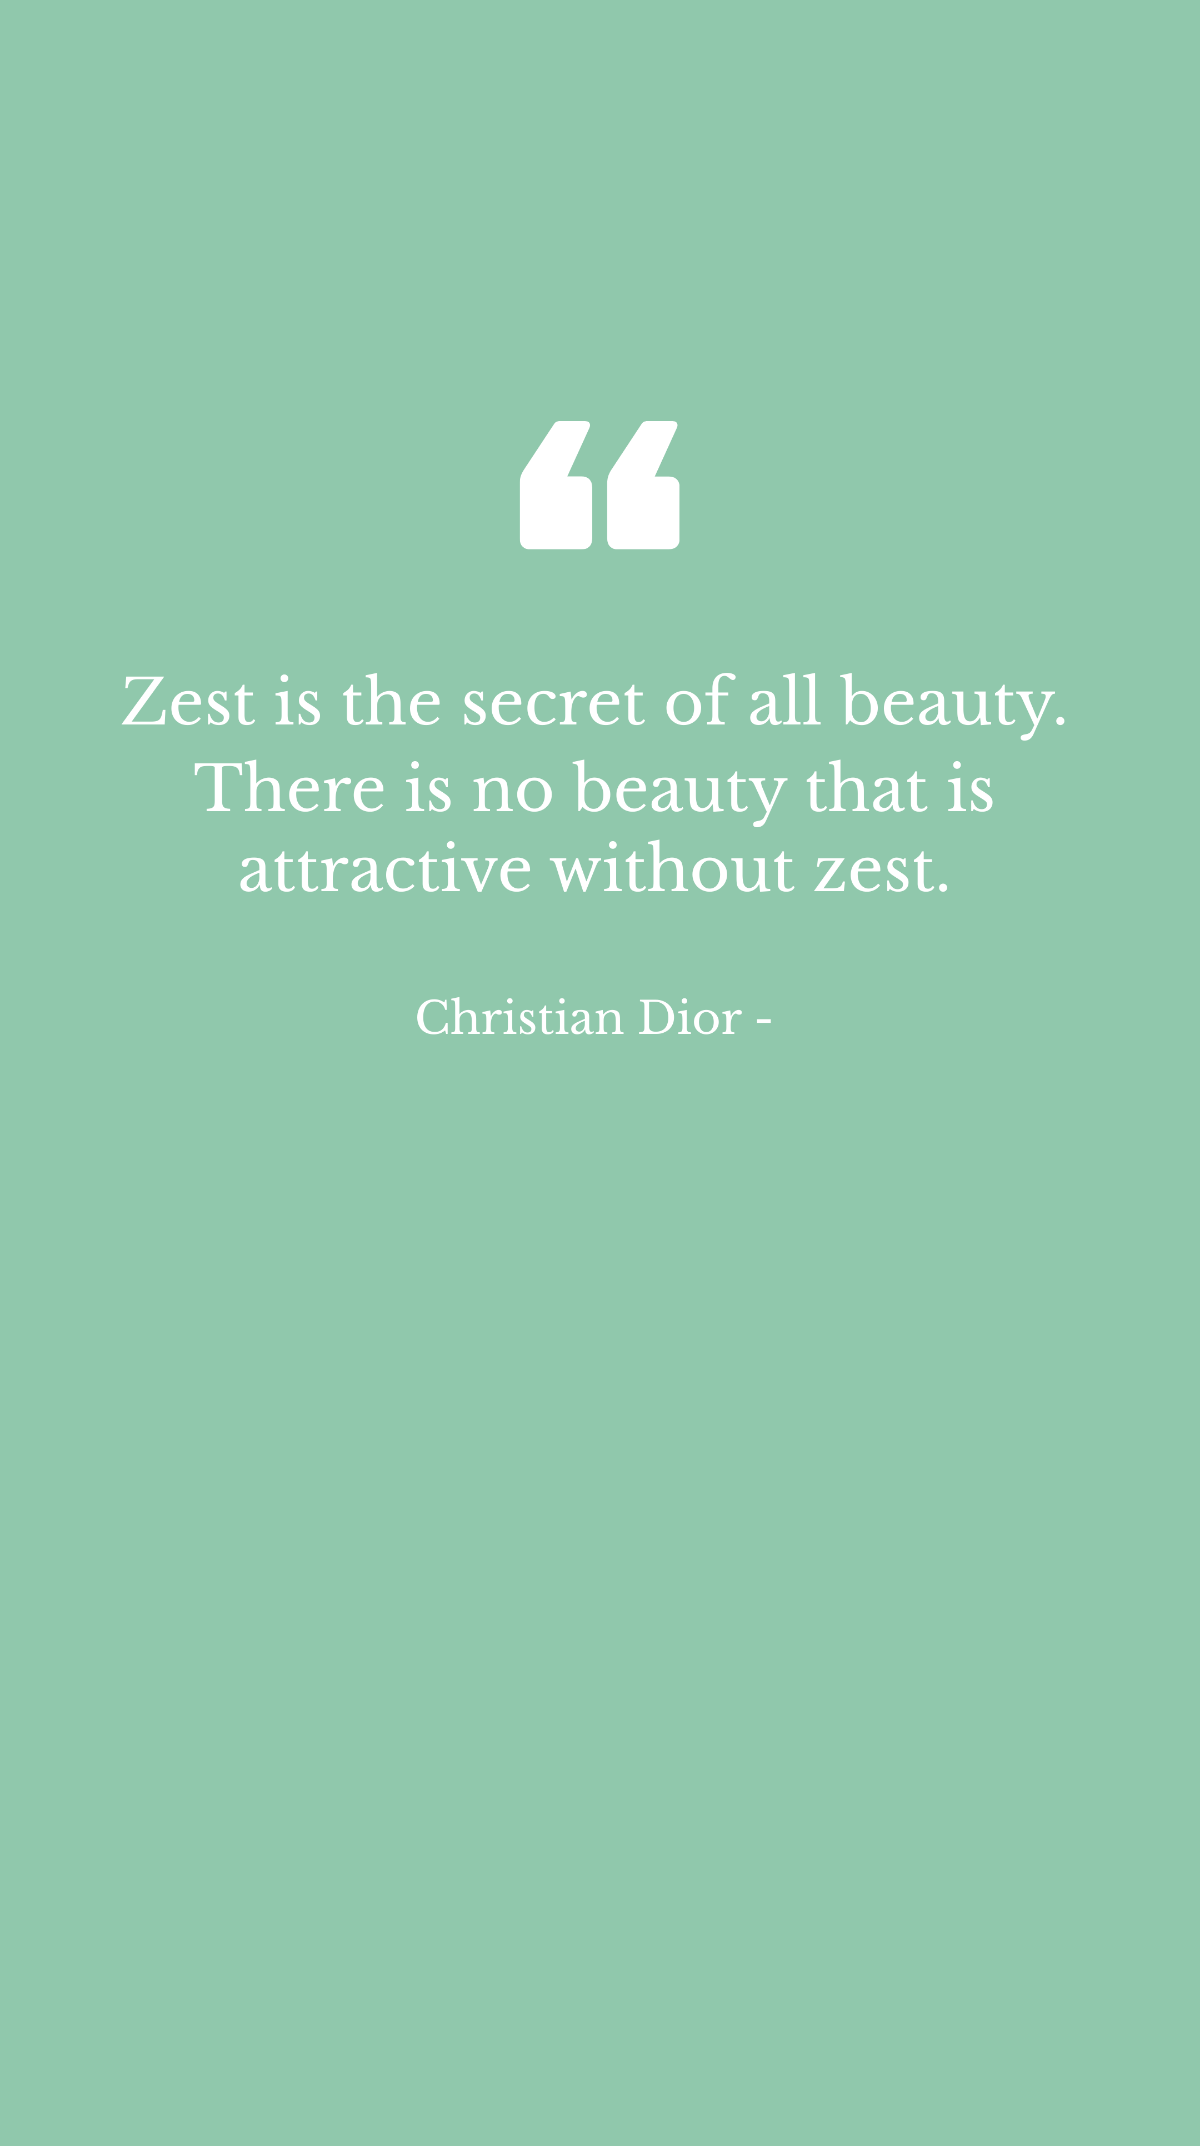 Free Christian Dior - Zest is the secret of all beauty. There is no beauty that is attractive without zest. Template